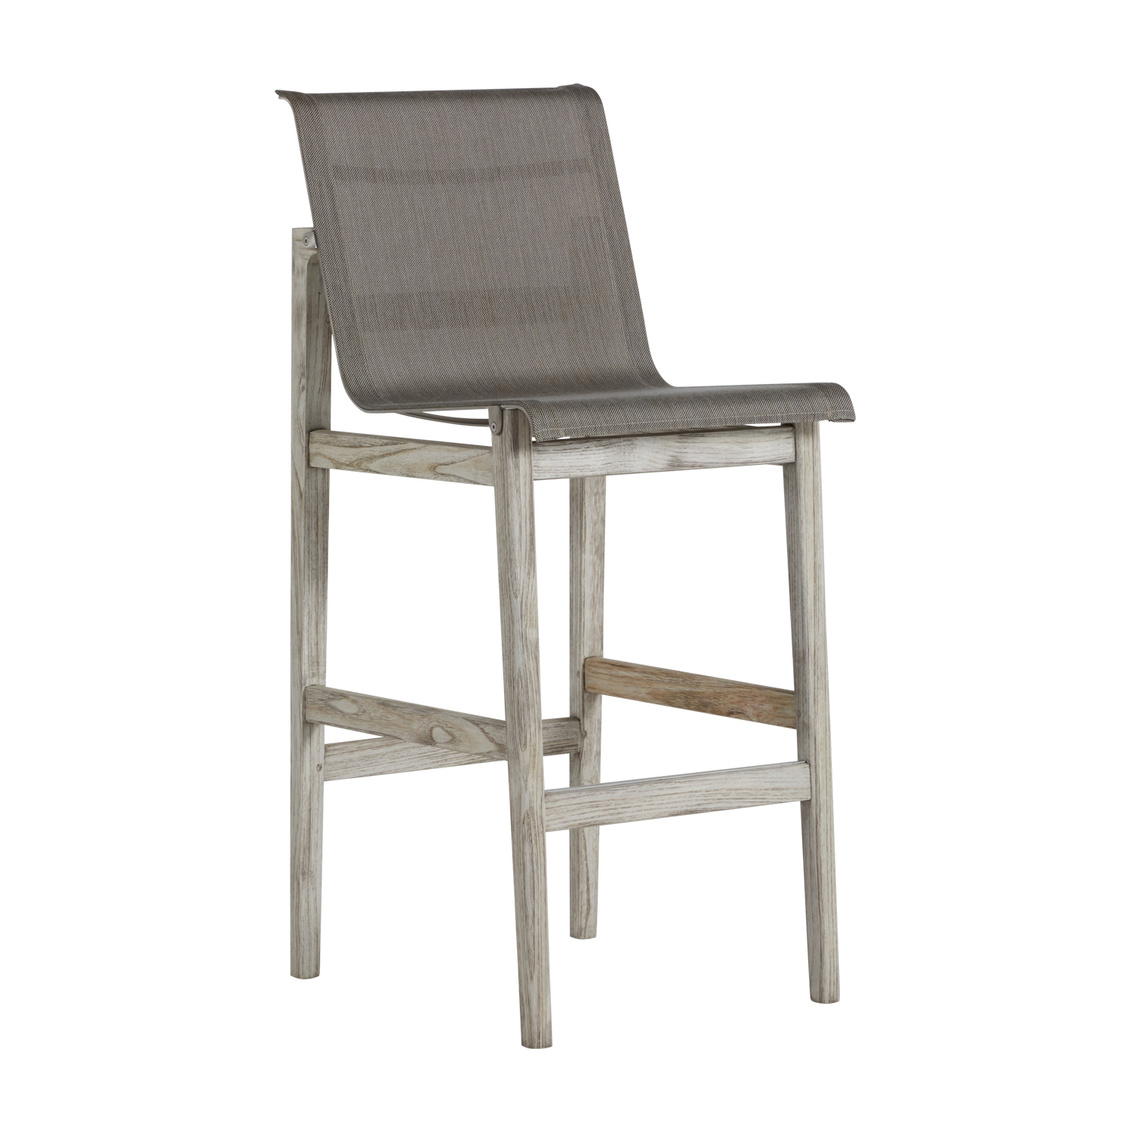 30.375 inch coast bar stool in oyster teak / heather grey sling product image